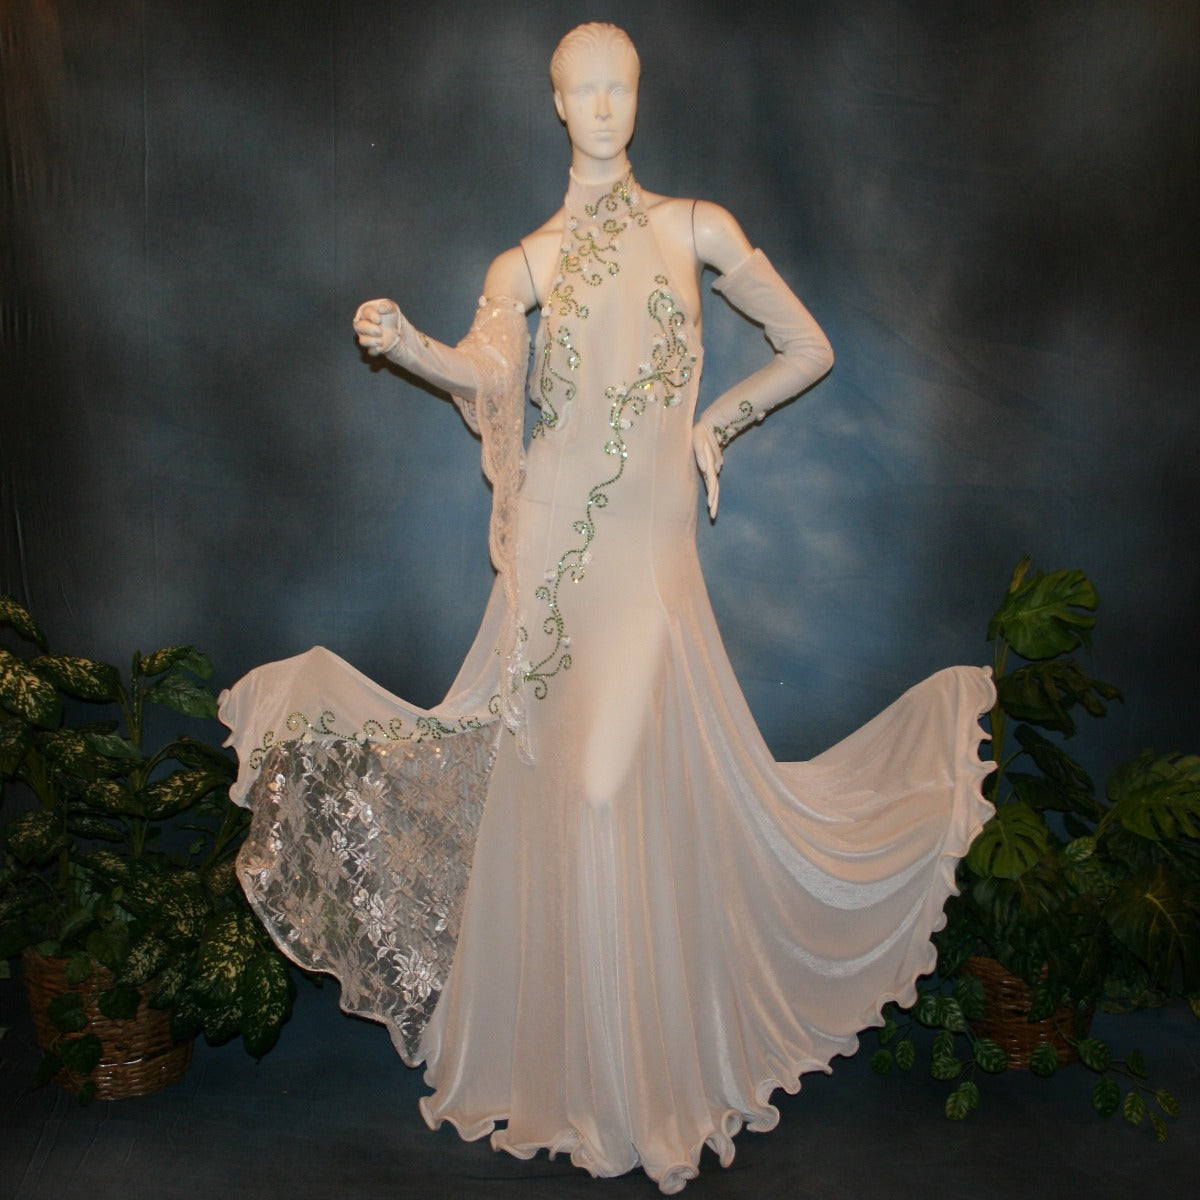 Crystal's Creations White ballroom dance dress was created in luxurious white stretch velvet with sequined lace insets & arm float, embellished with green peridot Swarovski detailed rhinestone work & miniature silk roses, and recently added more detail work